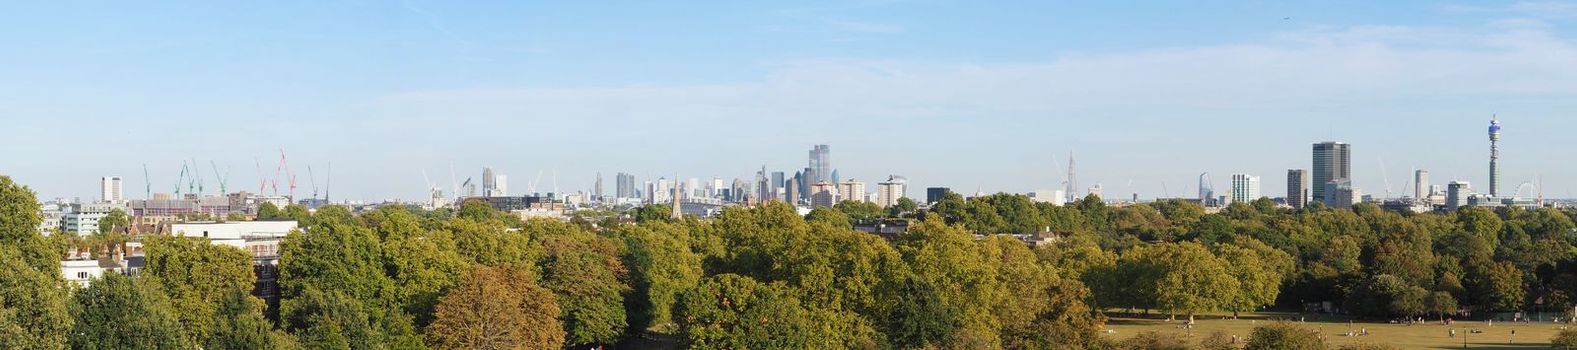 LONDON - CIRCA SEPTEMBER 2019: Wide panoramic view of London skyline seen from Primrose Hill, high resolution